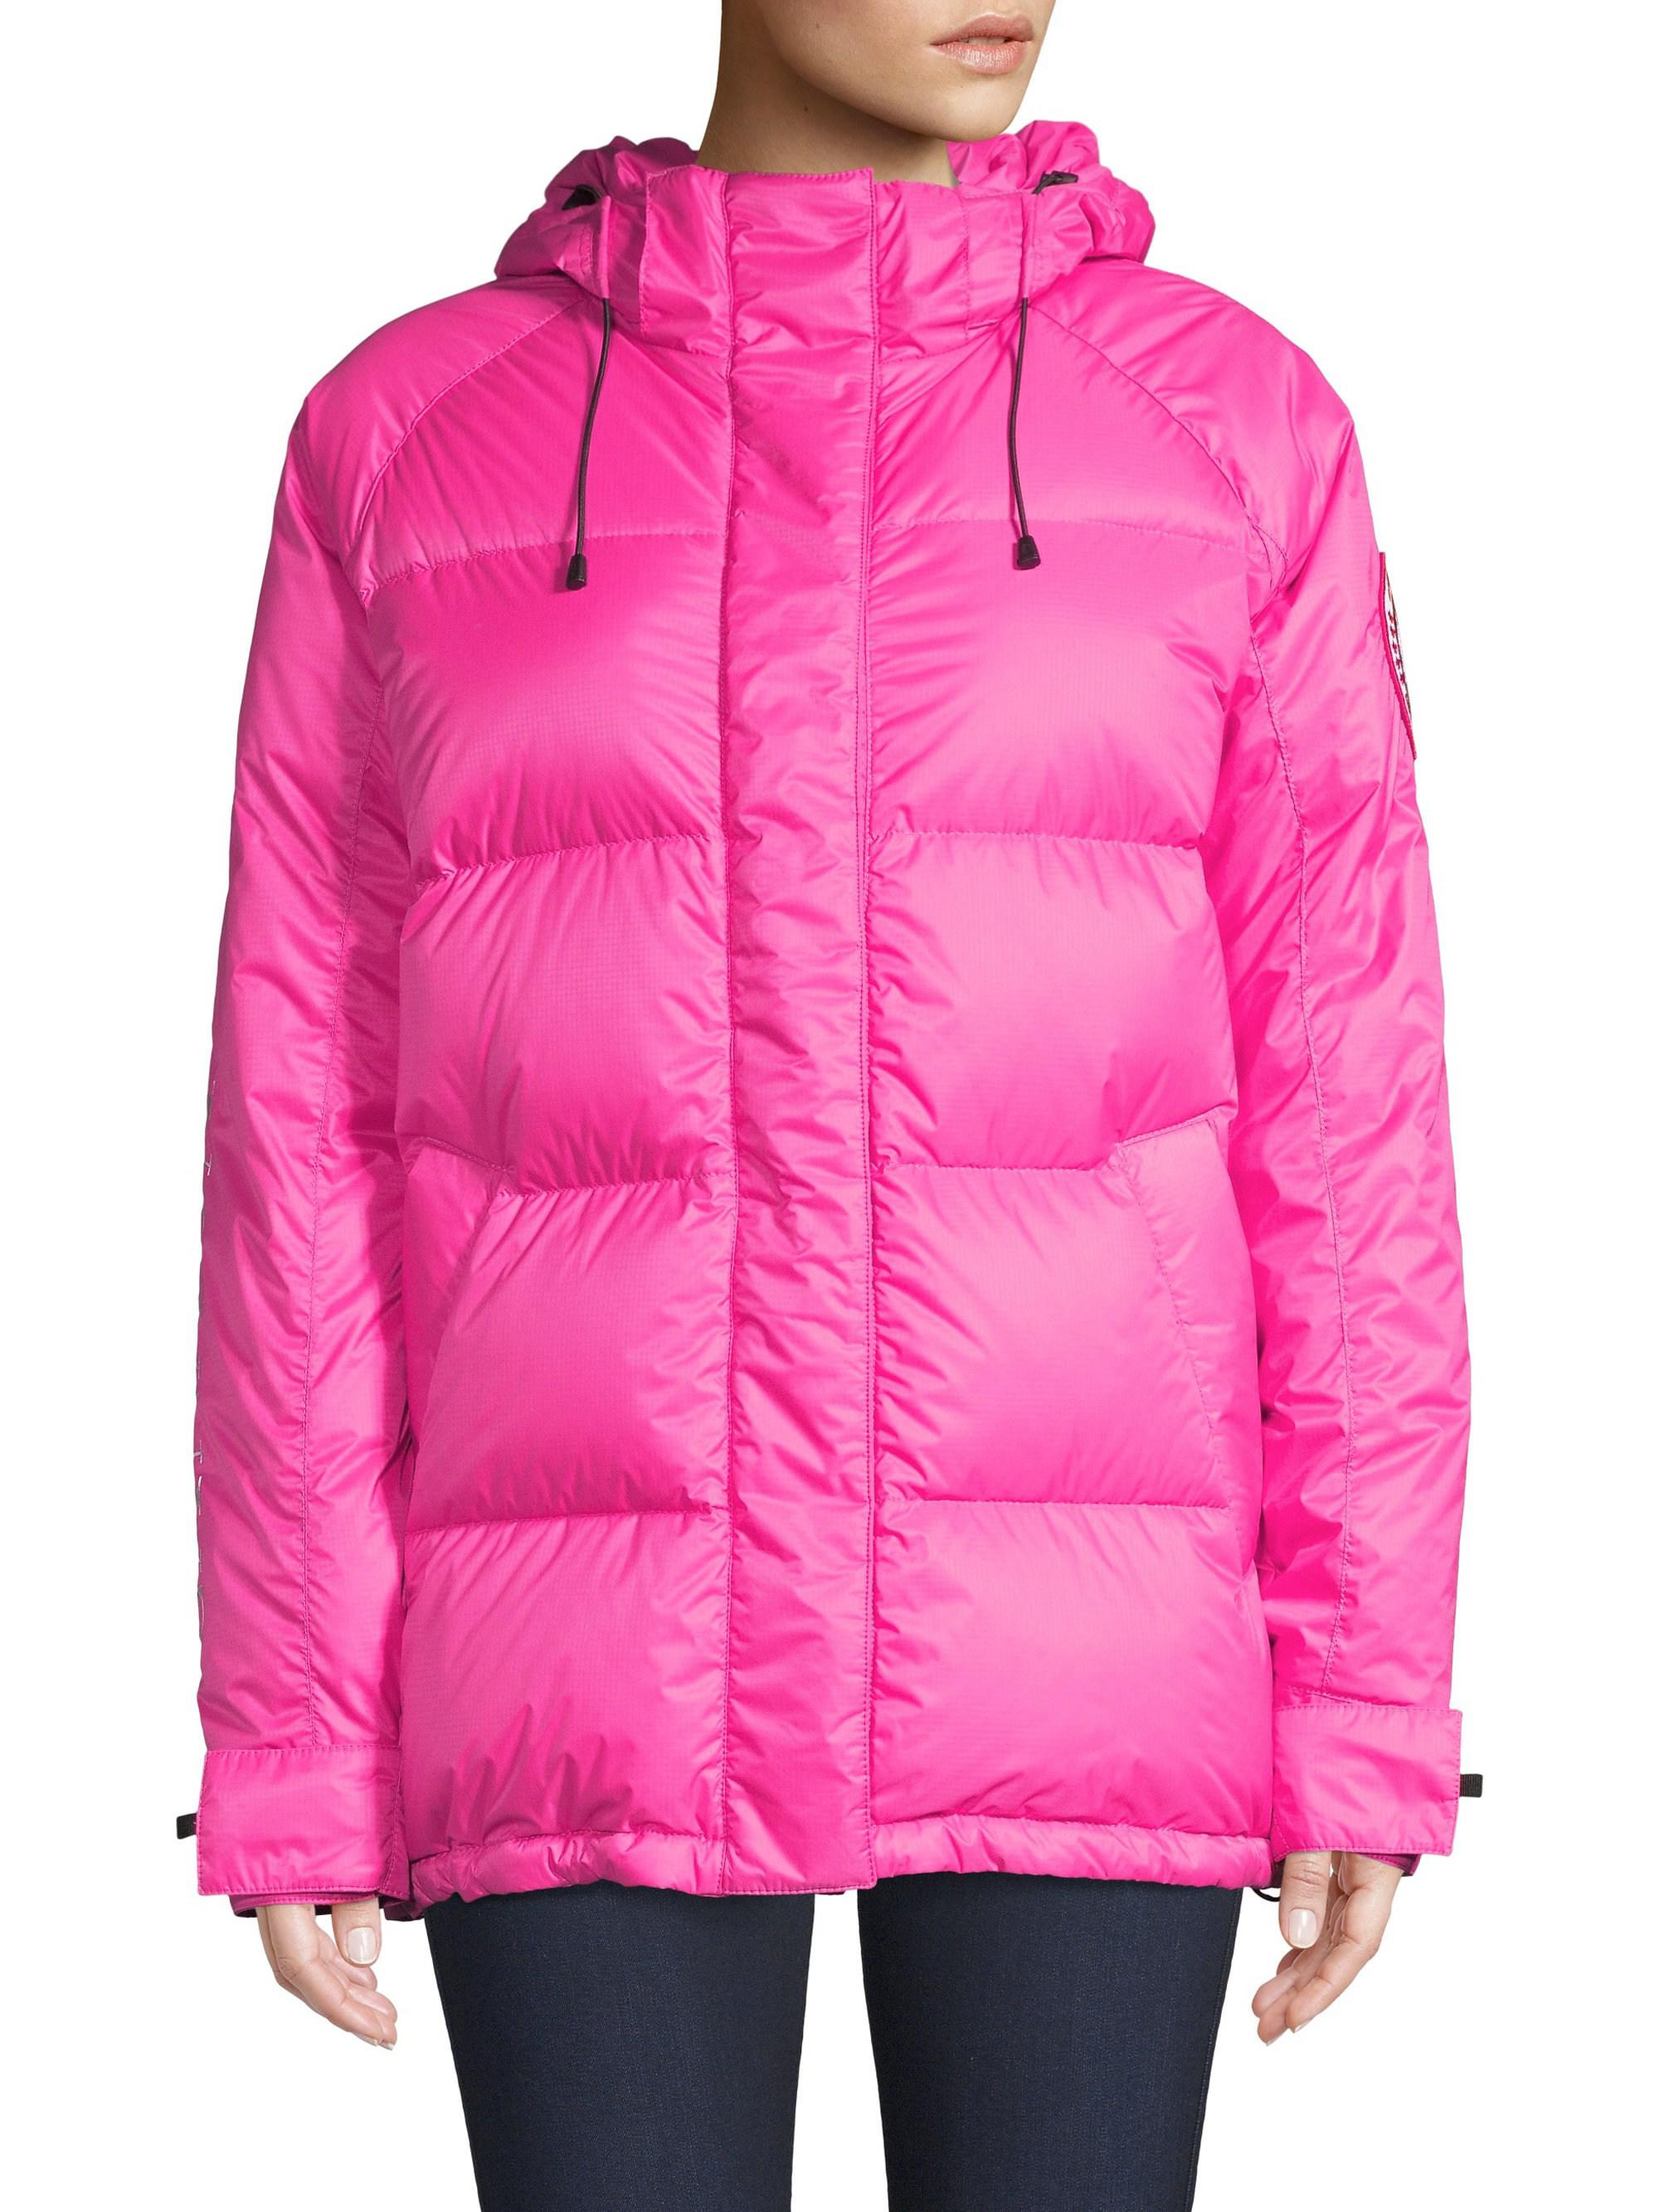 Canada Goose Goose Approach Puffer Jacket in Pink - Lyst